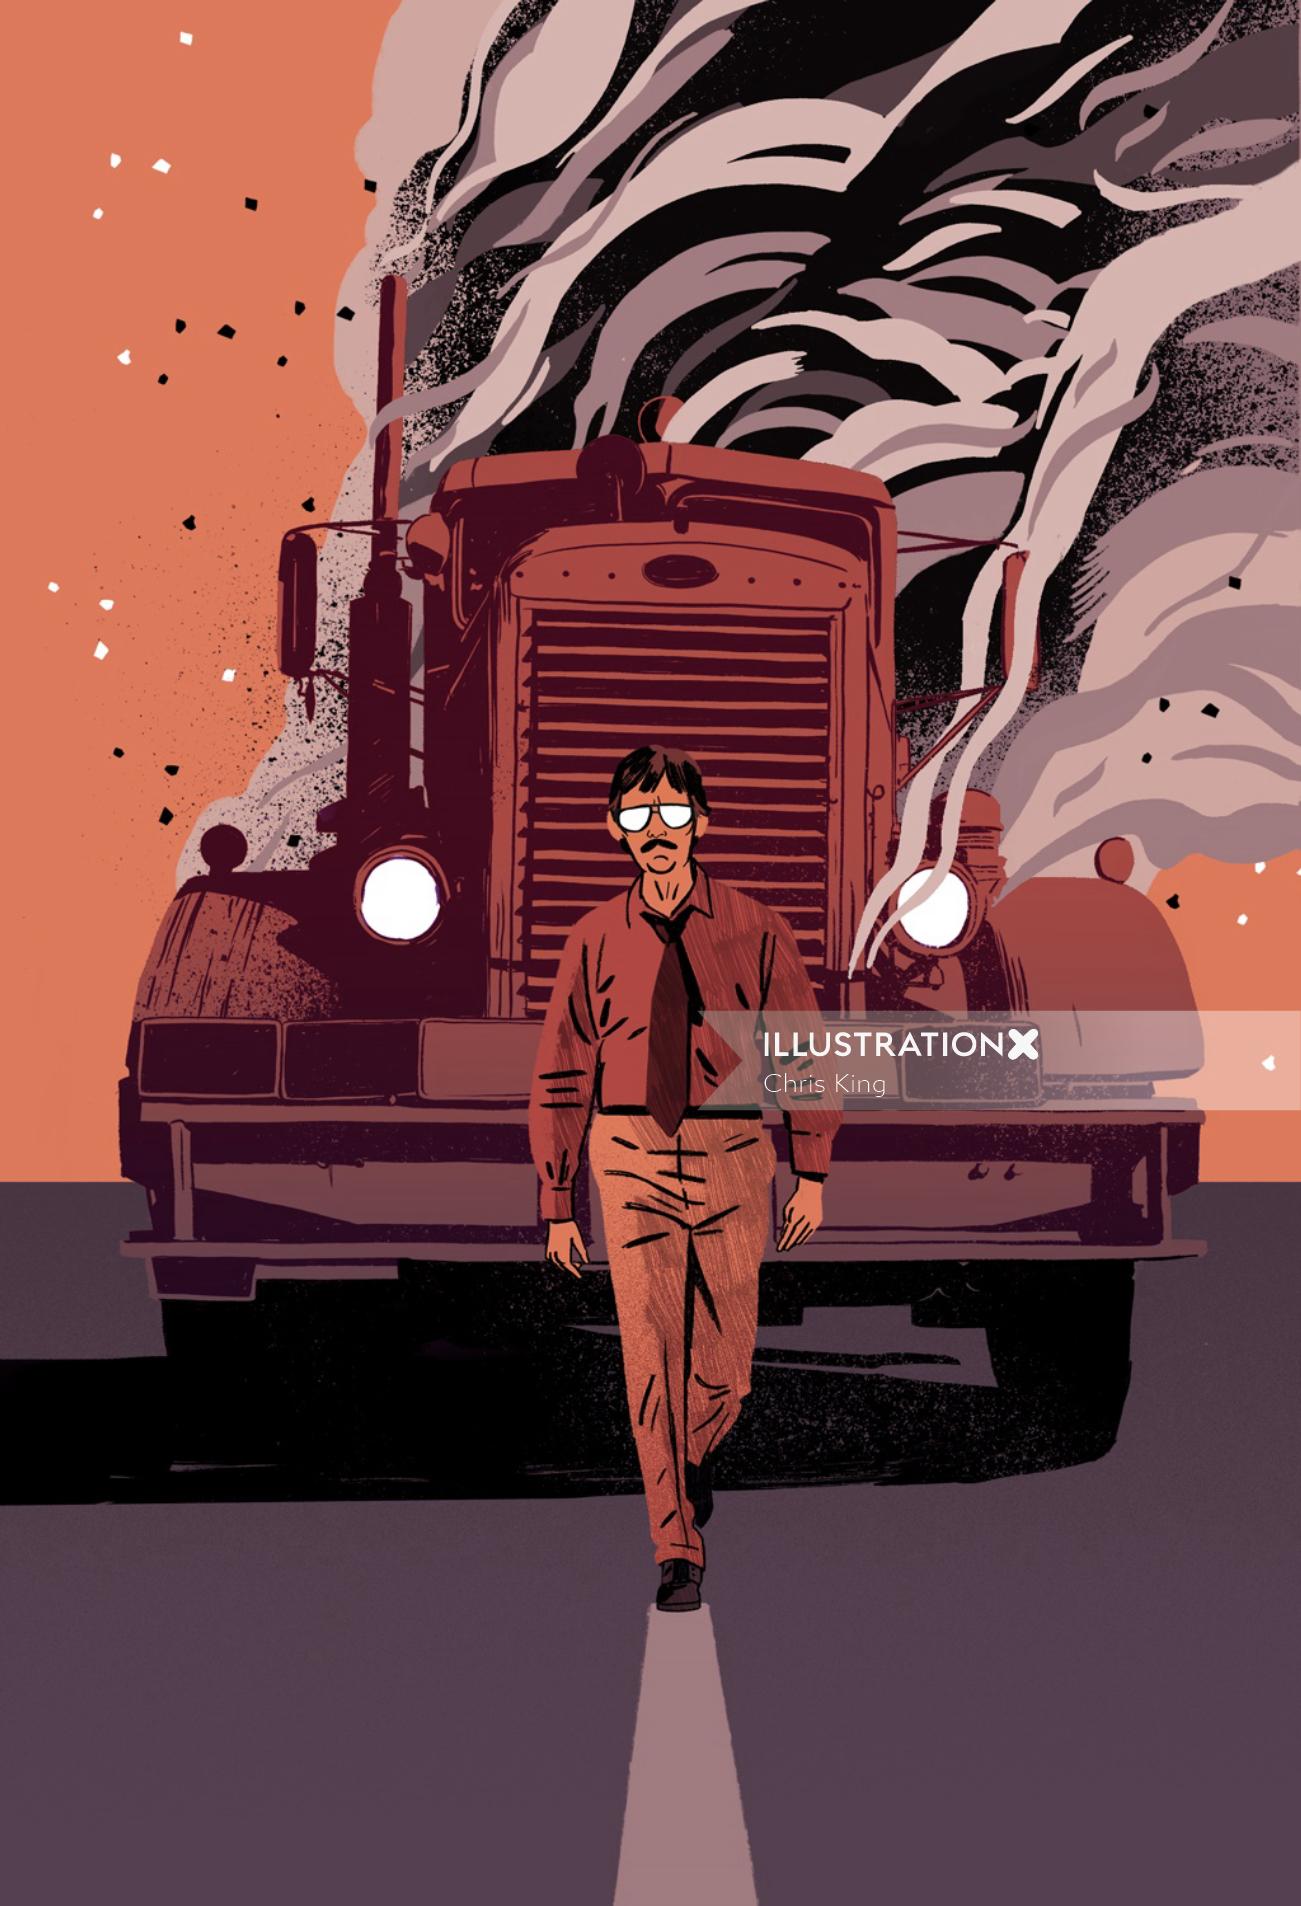 An illustration of man walking front of a smoky truck